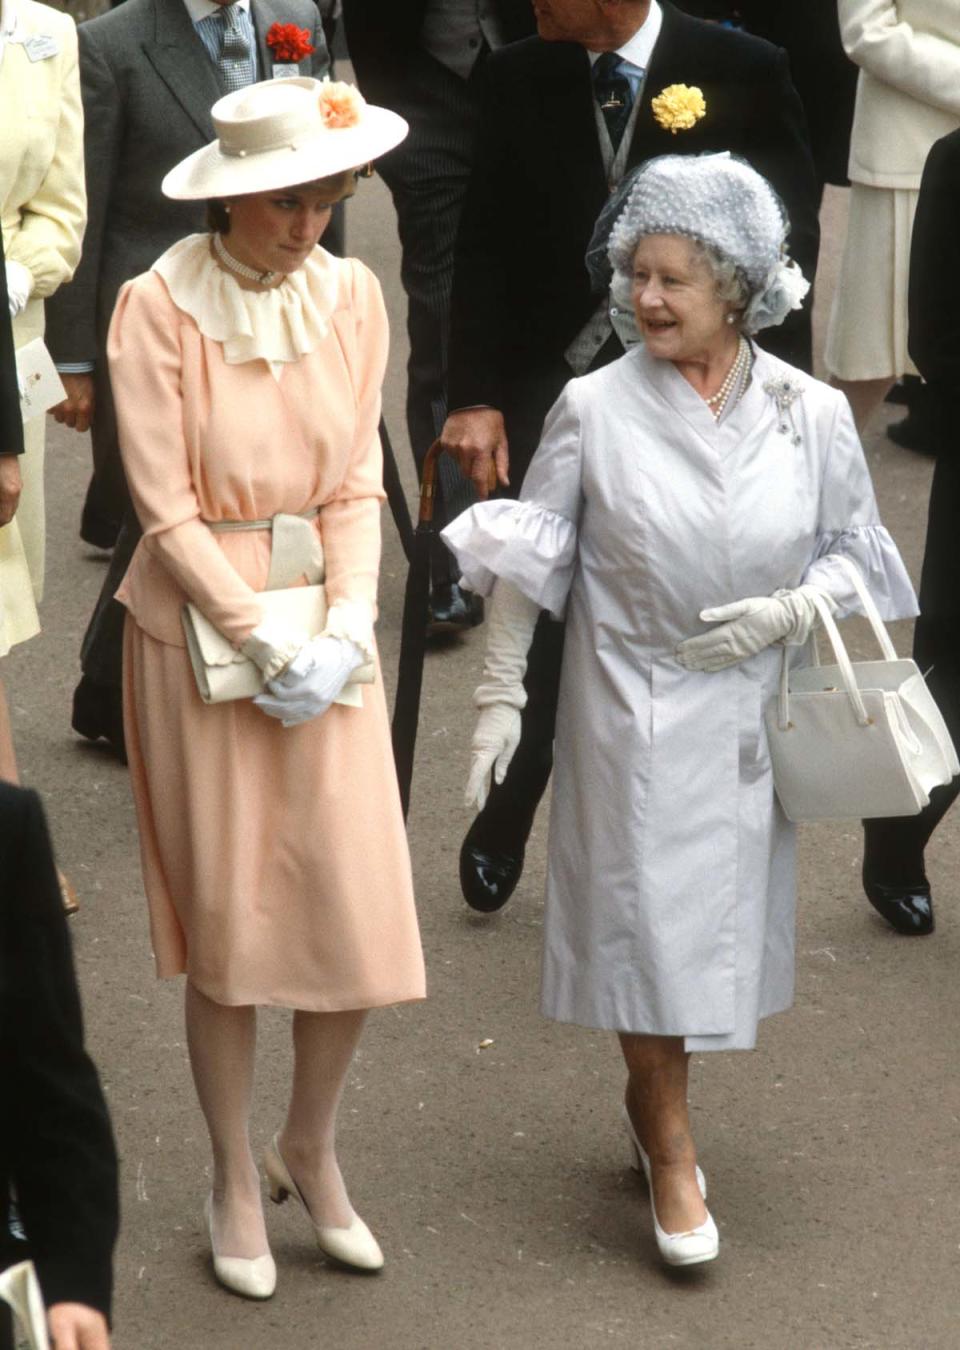 ASCOT, ENGLAND - JUNE 17: Lady Diana Spencer, wearing a peach coloured crepe suit with a wrap top jacket and cream ruffle neck blouse designed by Benny Ong and a yellow straw boater hat with a silk flower, walks next to Queen Elizabeth, The Queen Mother (R) as they attend Royal Ascot on June 17, 1981 in Ascot, United Kingdom. (Photo by Anwar Hussein/Getty Images)